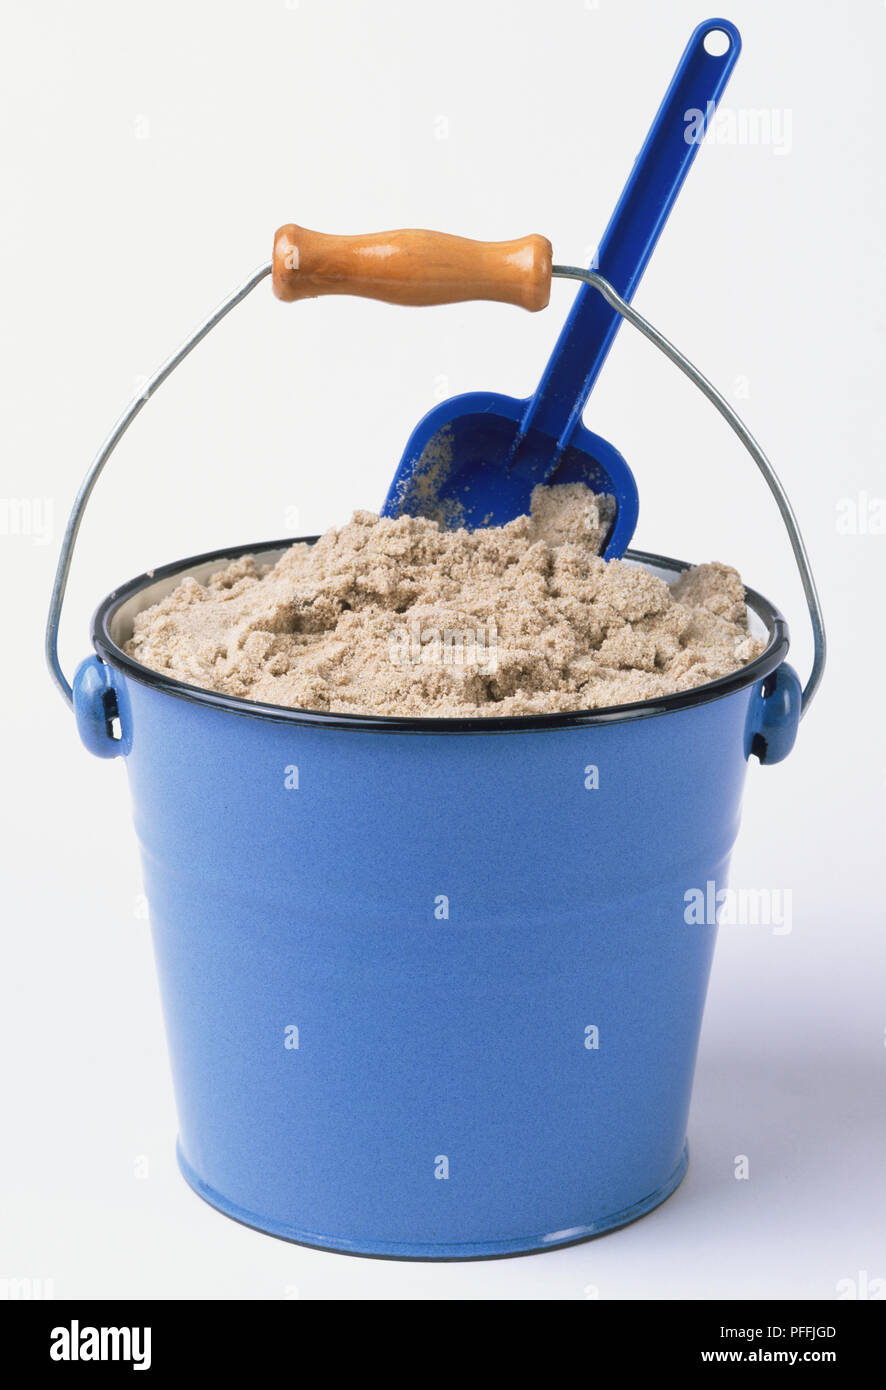 Child's pale blue metal bucket and spade with wet sand inside, front view. Stock Photo